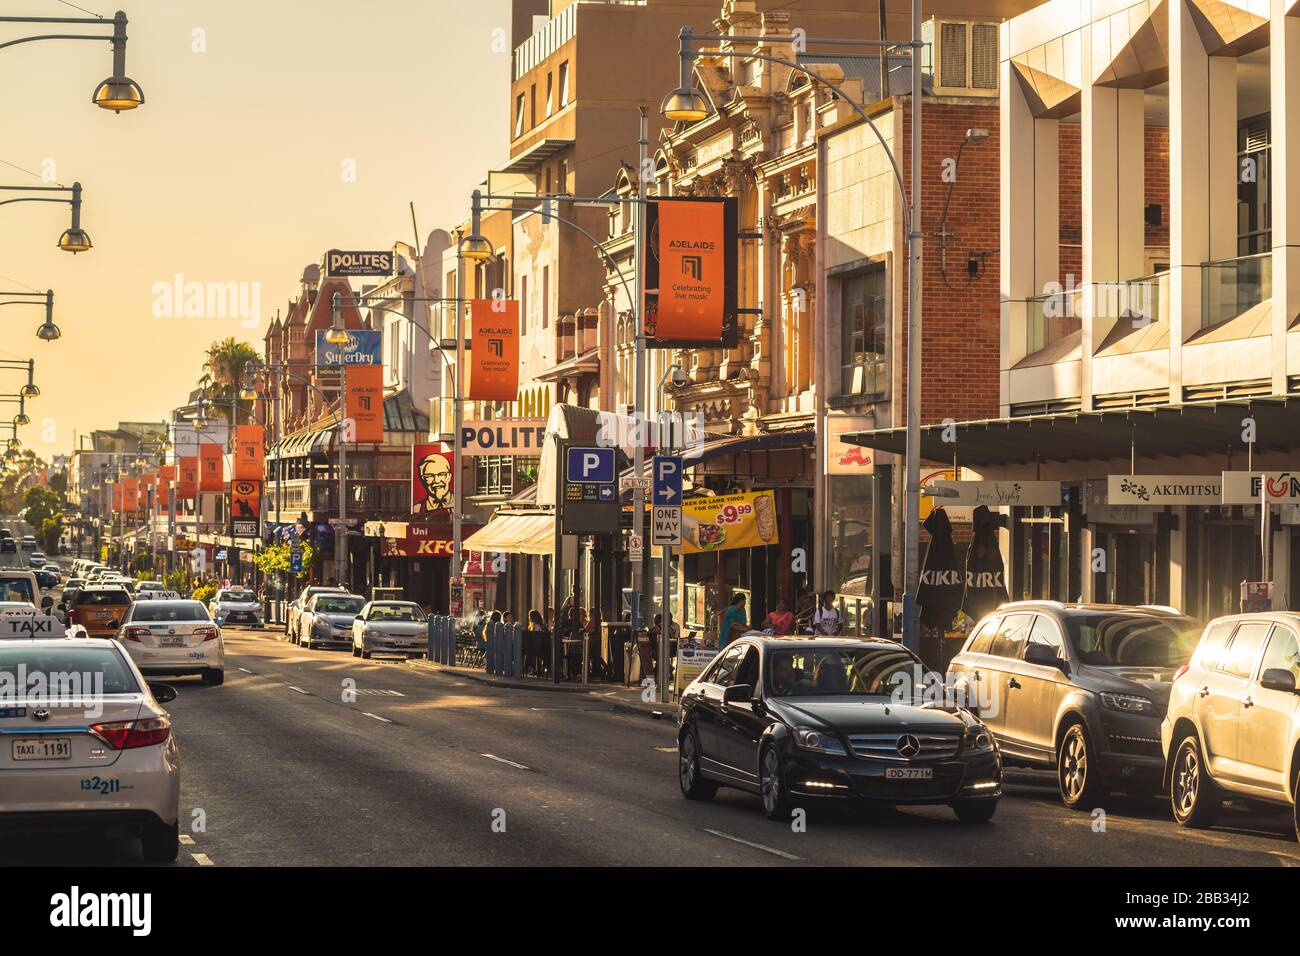 Adelaide, Australia - January 26, 2020: Hindley Street with bars, cafes and restaurants in Adelaide CBD looking west at sunset Stock Photo